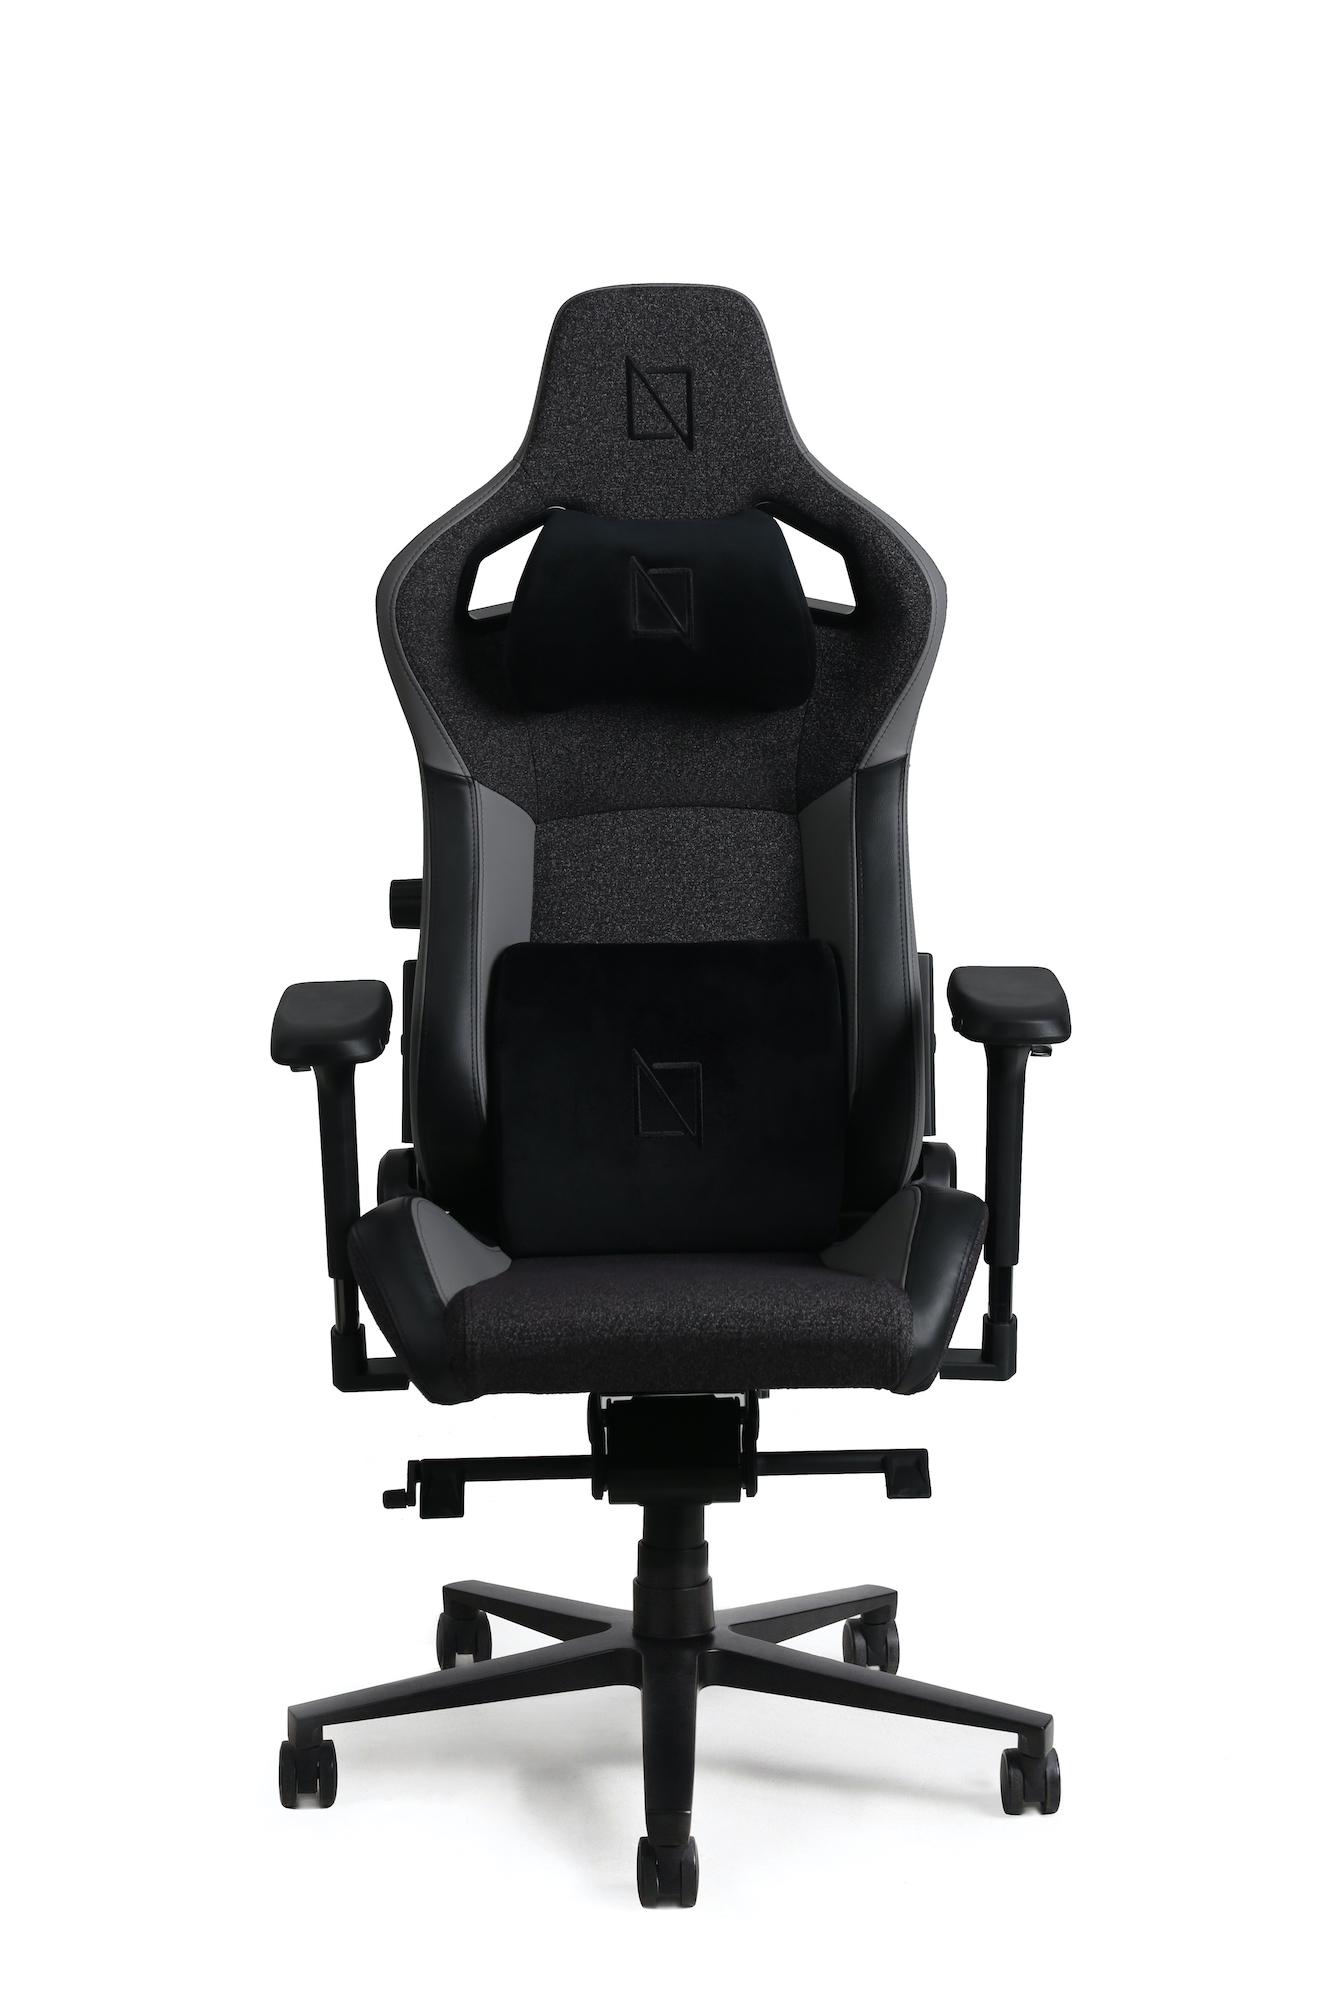 Premium Ergonomic Chair for Gaming/Office, 155° Reclining High Back Chair with 4D Metal Armrest, Magnetic Memory Foam Headrest & Lumbar Support